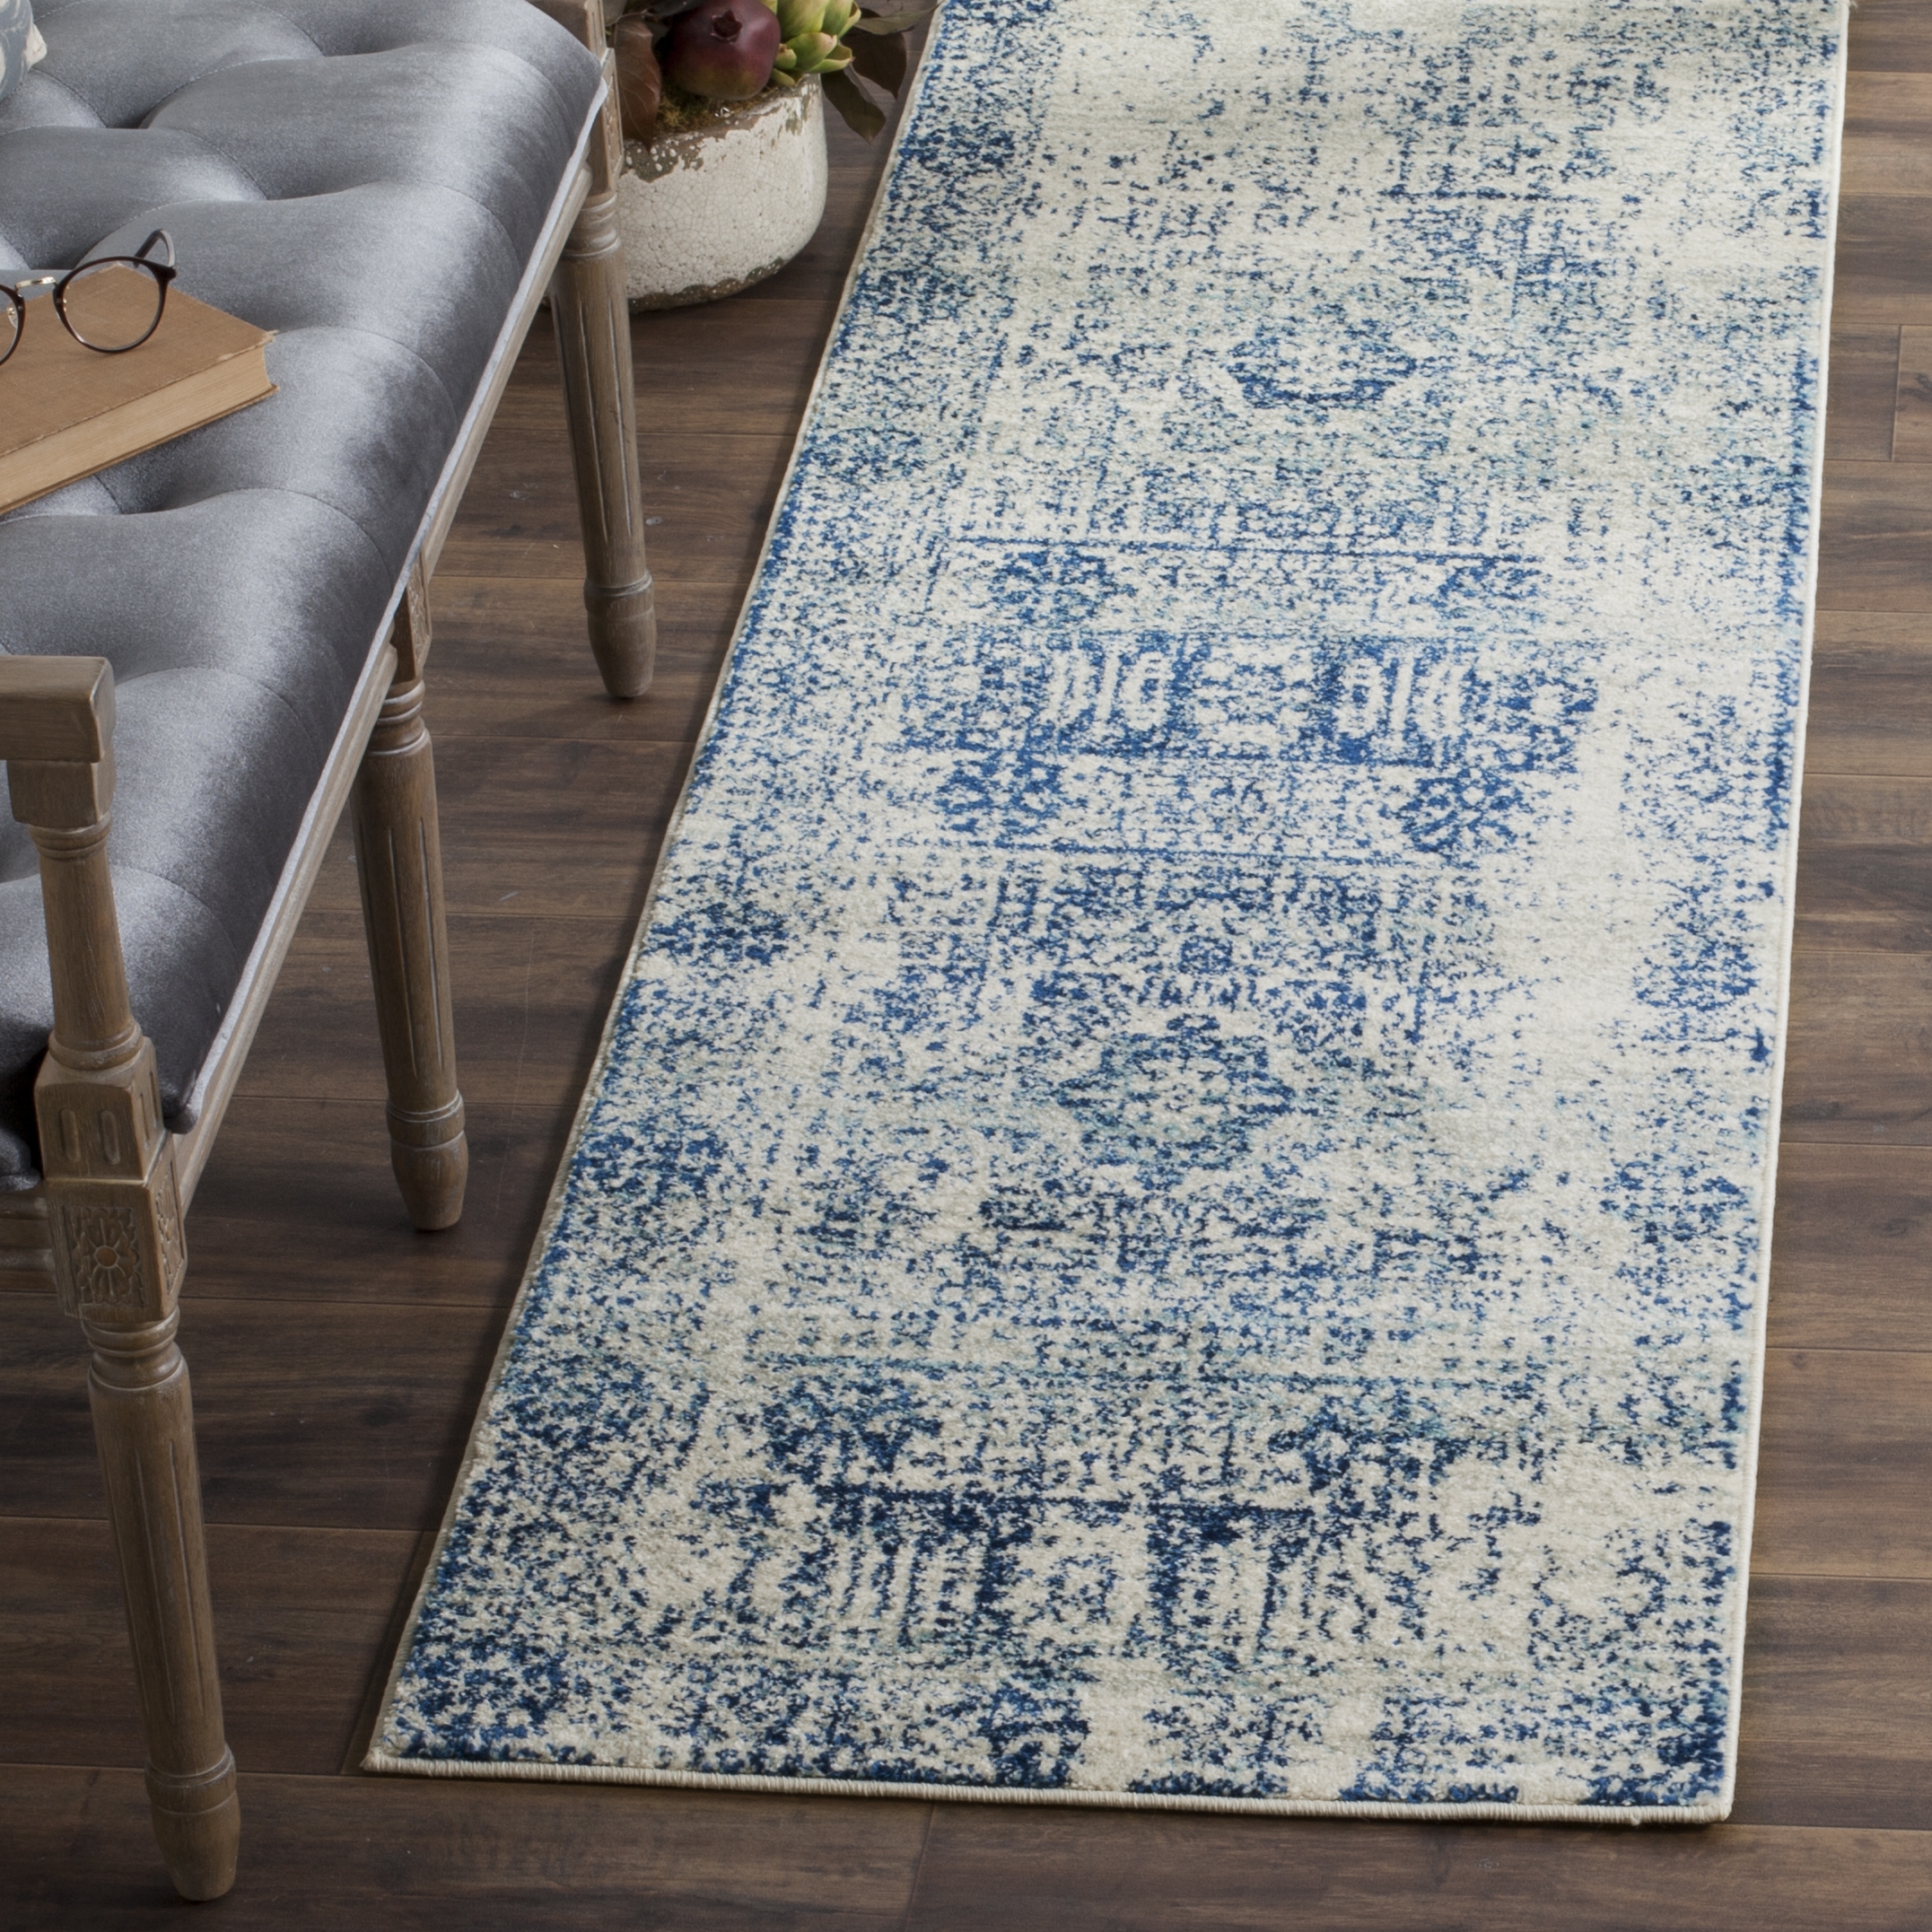 Arlo Home Woven Area Rug, EVK260C, Ivory/Blue,  2' 2" X 17' - Image 1